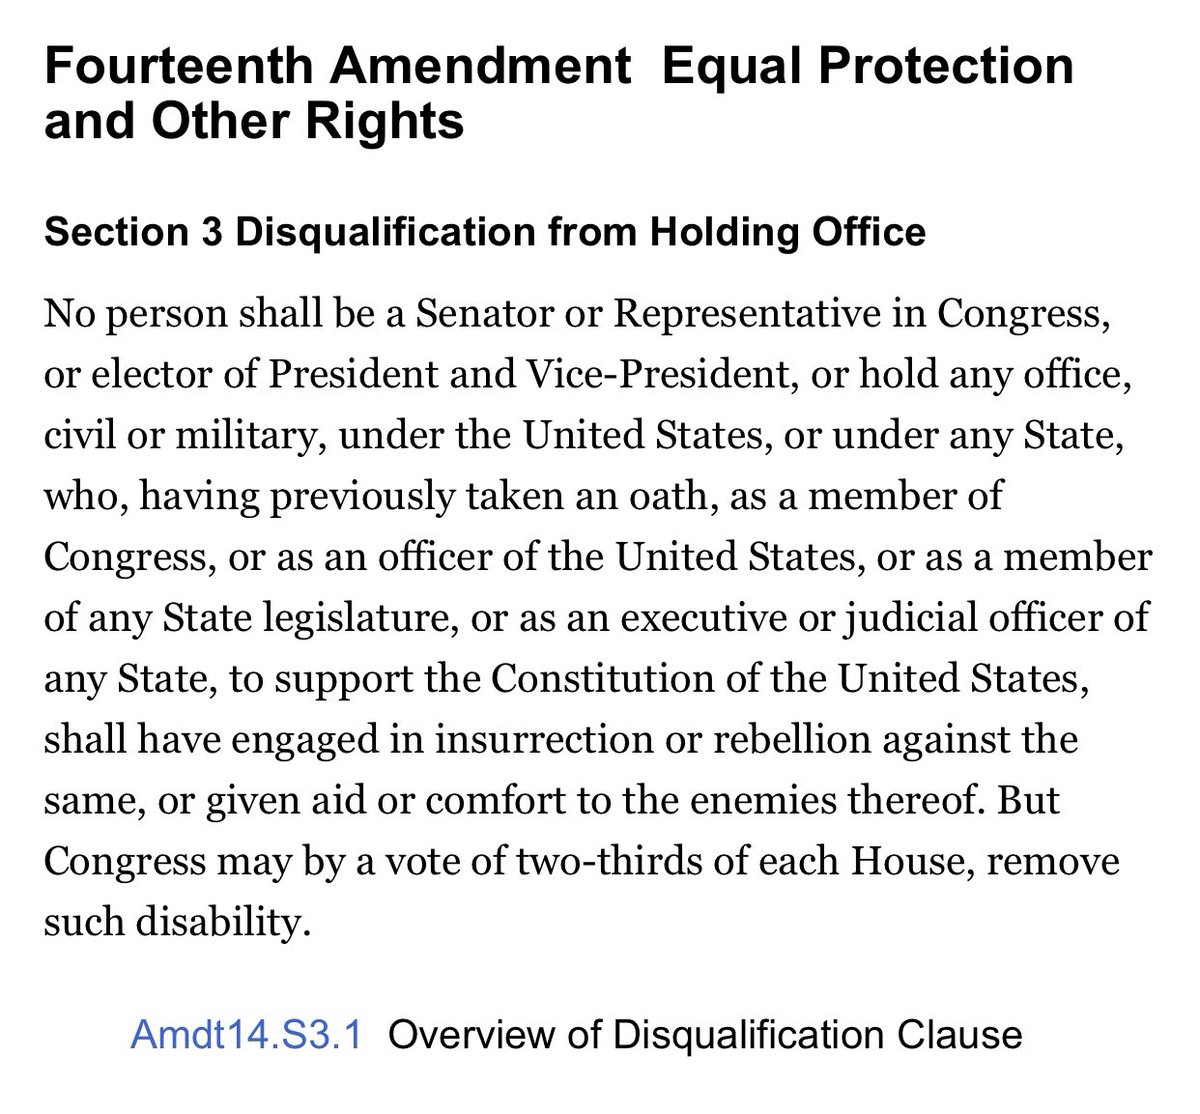 Fact the Republicans are trying to cover up:

Donald Trump disqualified himself for running for President by publicly comforting and aiding January 6 Insurrectionists.

Our Constitution clearly states this in the Disqualification Clause of our 14th Amendment. #TrumpisDisqualified